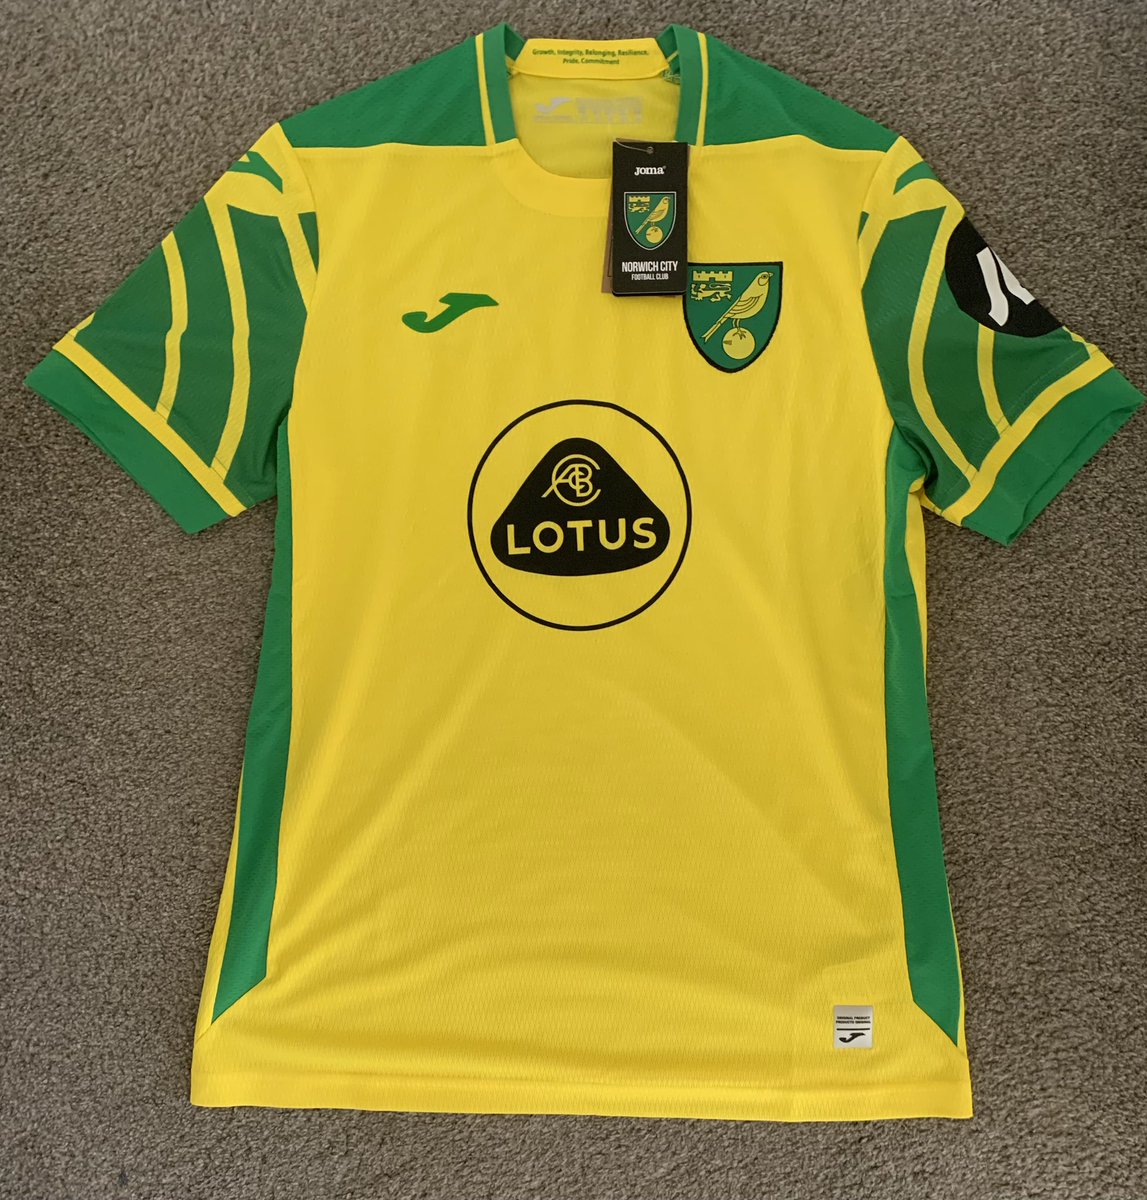 Today was a good post day! 💛💚 today’s @homeshirts1 is the new @JomaSportUK #ncfc home shirt, big fan of this & the new training shirts. Looking forward to seeing the away & 3rd soon! #ncfc #otbc @ChatShirt @The_Kitsman